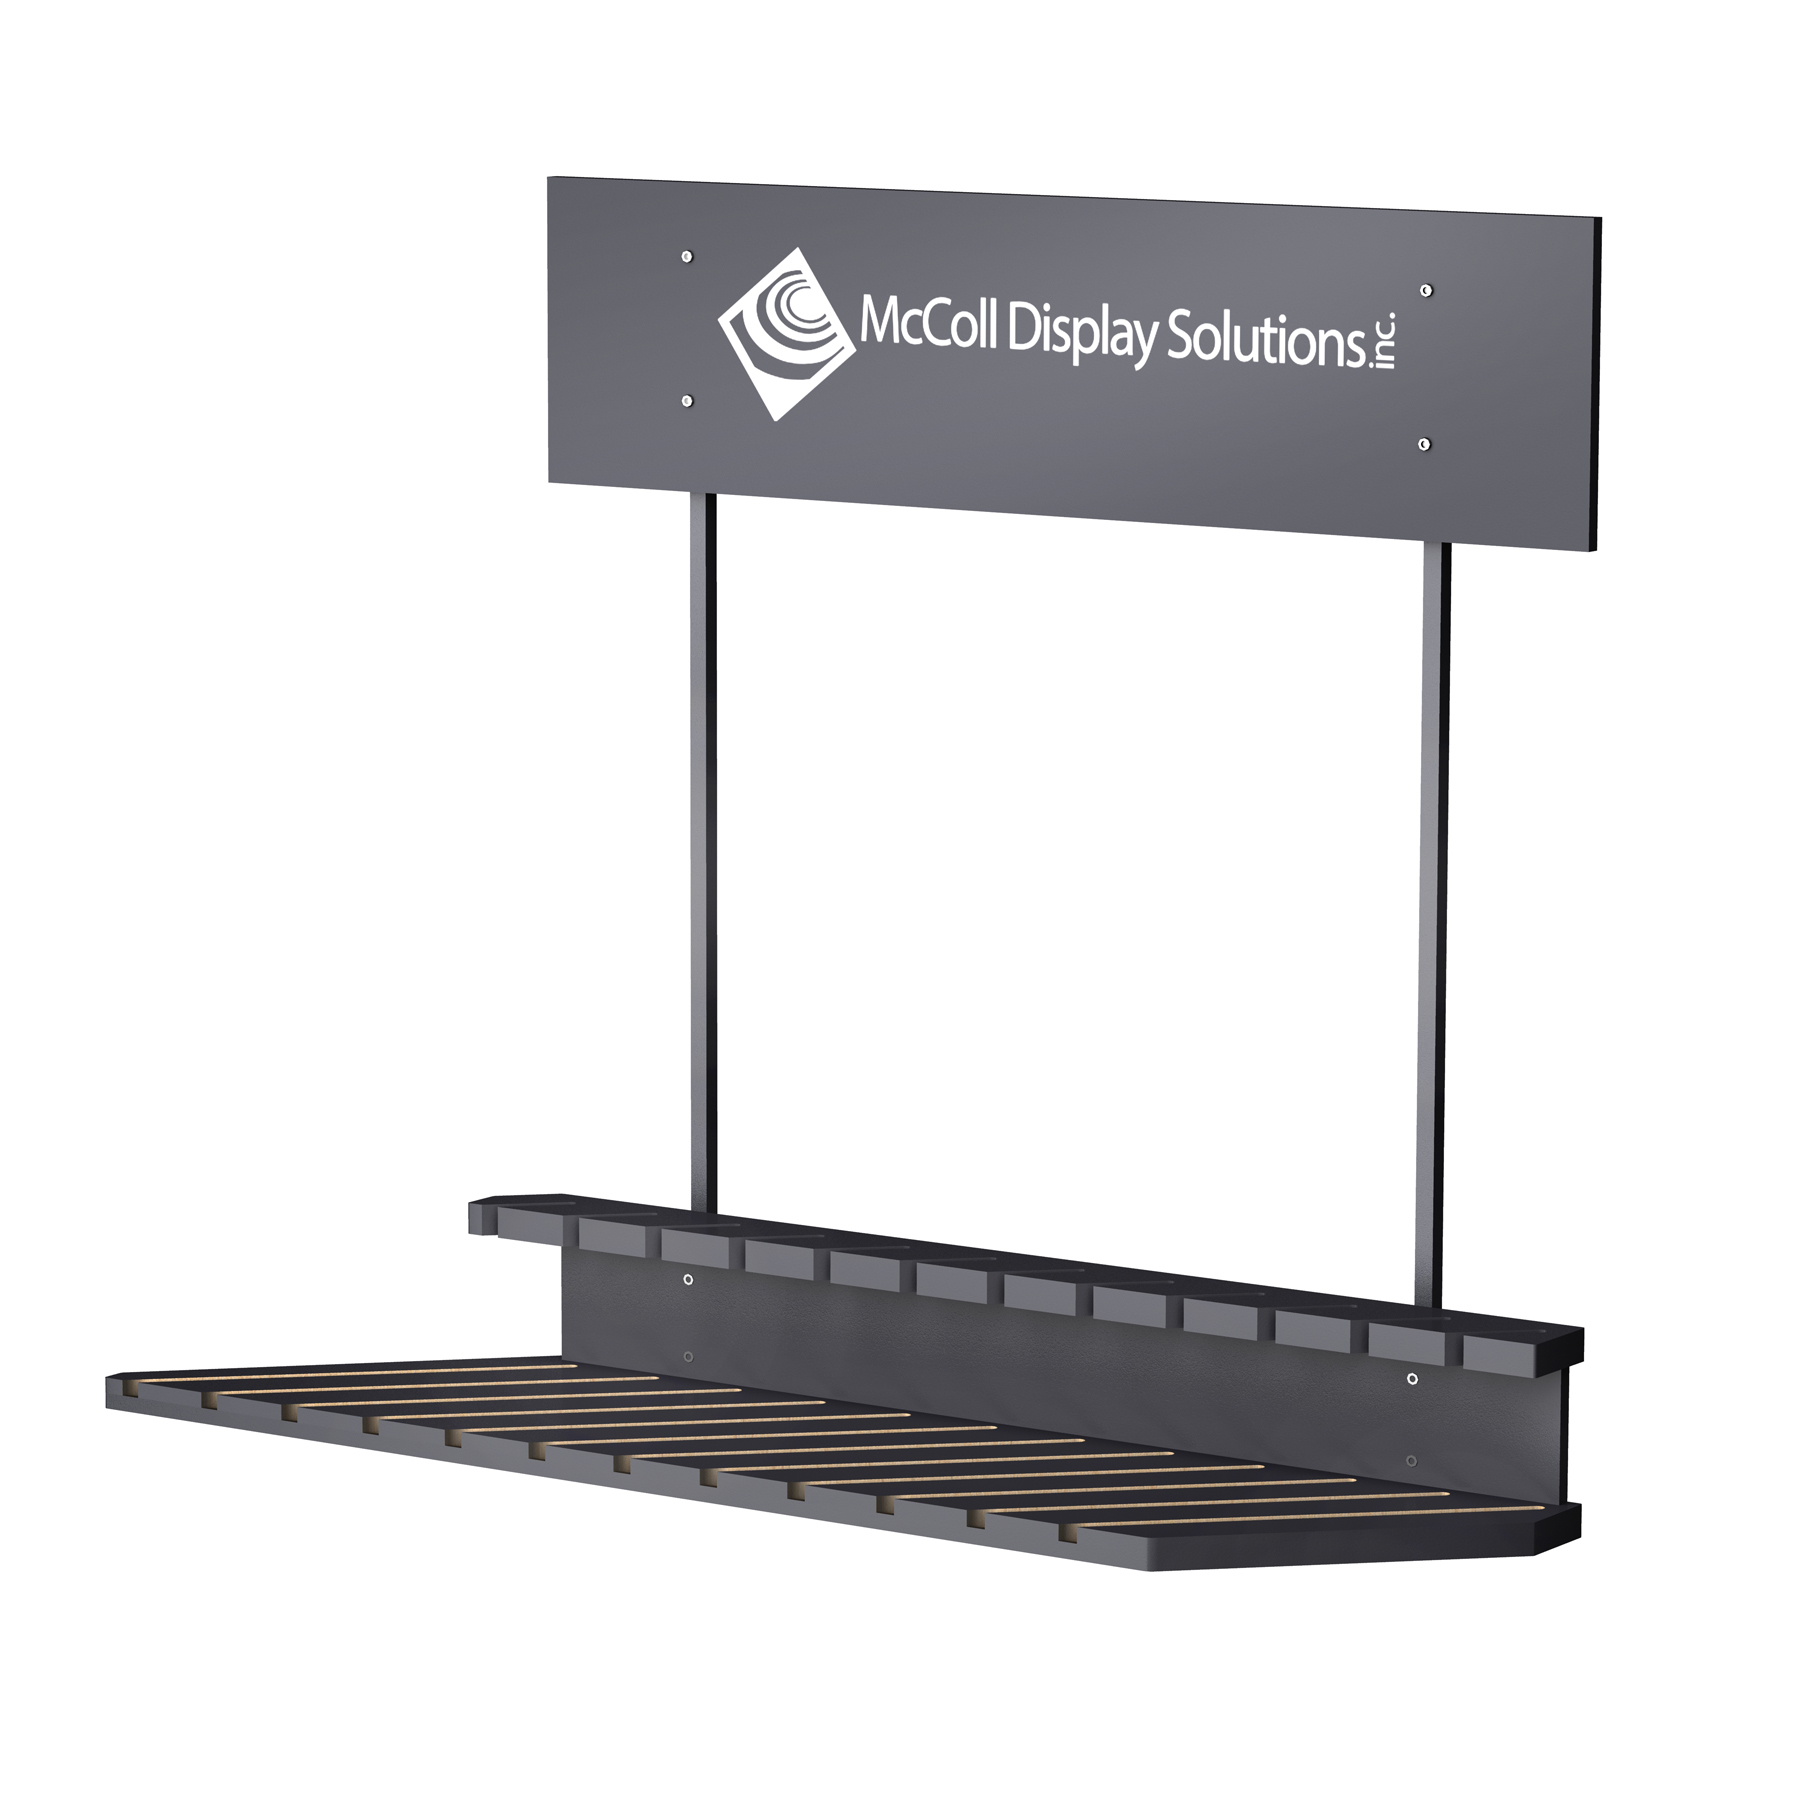 CD100 Floor Stand Display is Easy to Customize for Your Samples Add Screen Printed Signage